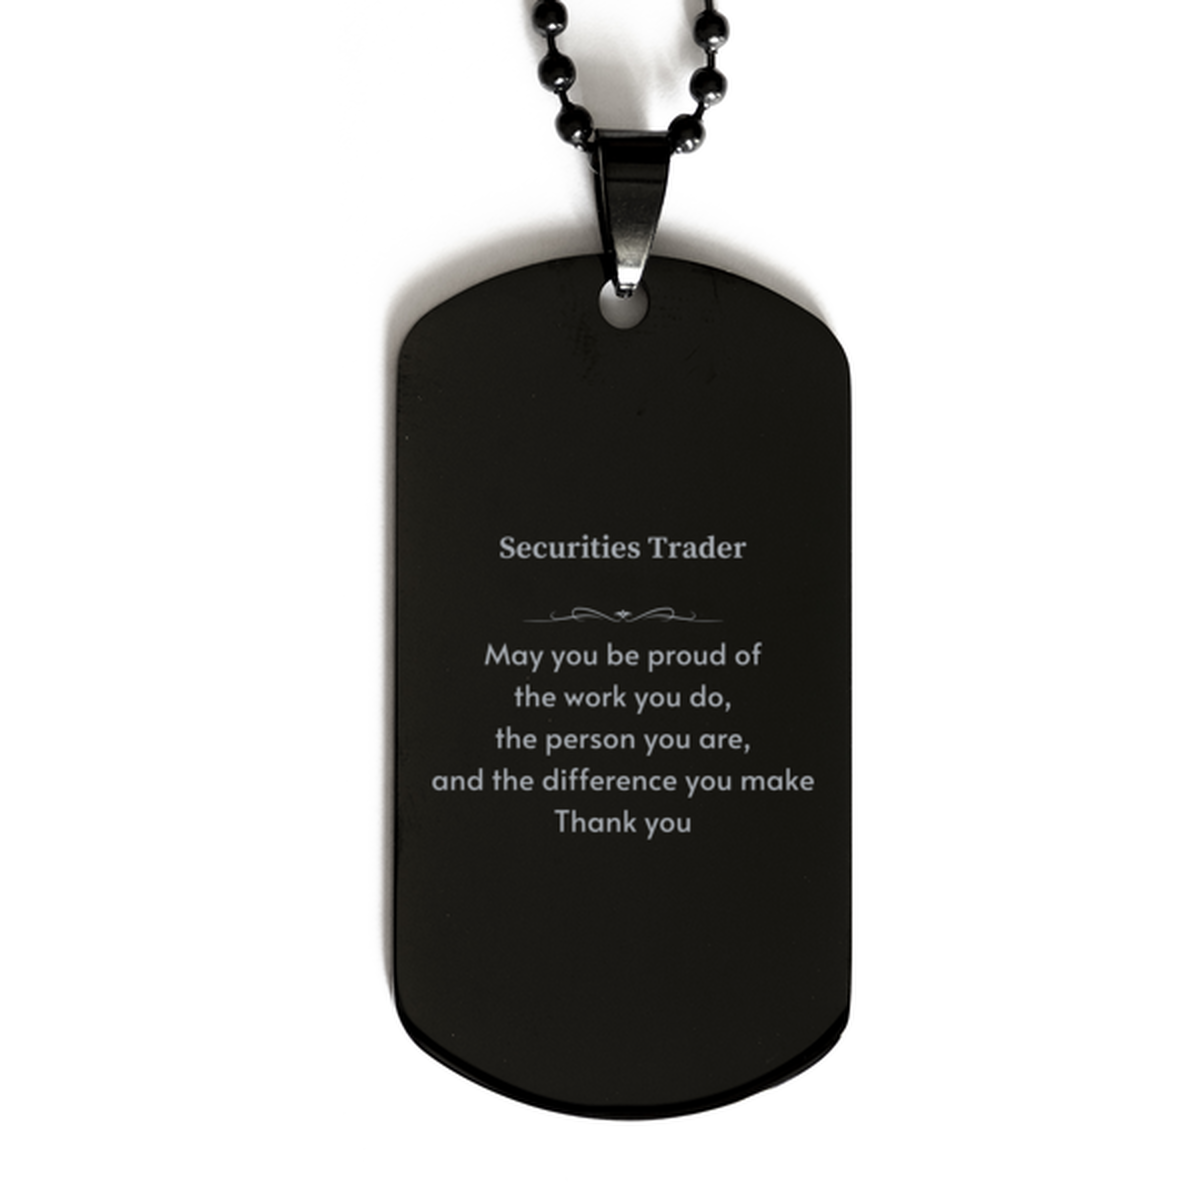 Heartwarming Black Dog Tag Retirement Coworkers Gifts for Securities Trader, Securities Trader May You be proud of the work you do, the person you are Gifts for Boss Men Women Friends